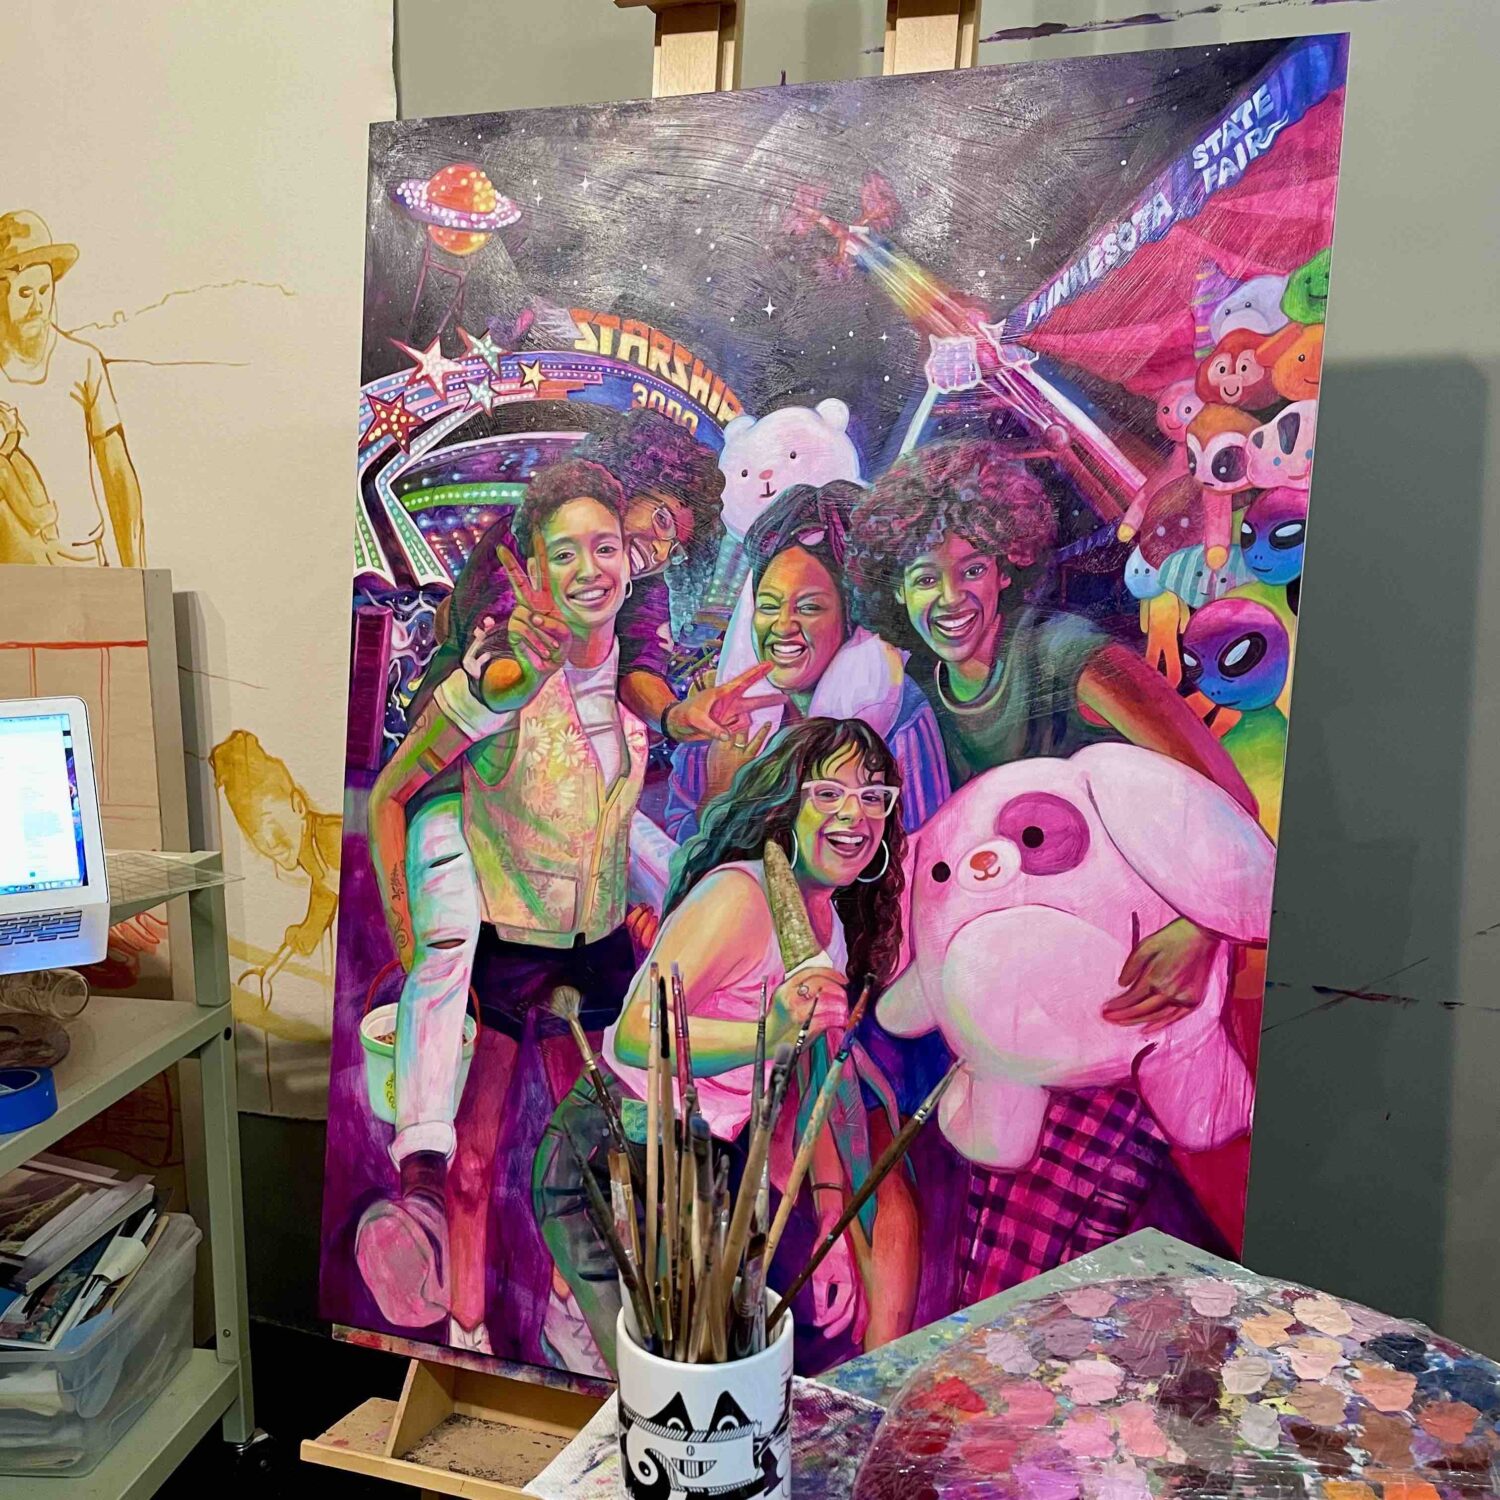 2022 Minnesota State Fair Official Commemorative Art by Leslie Barlow on an easel in her studio